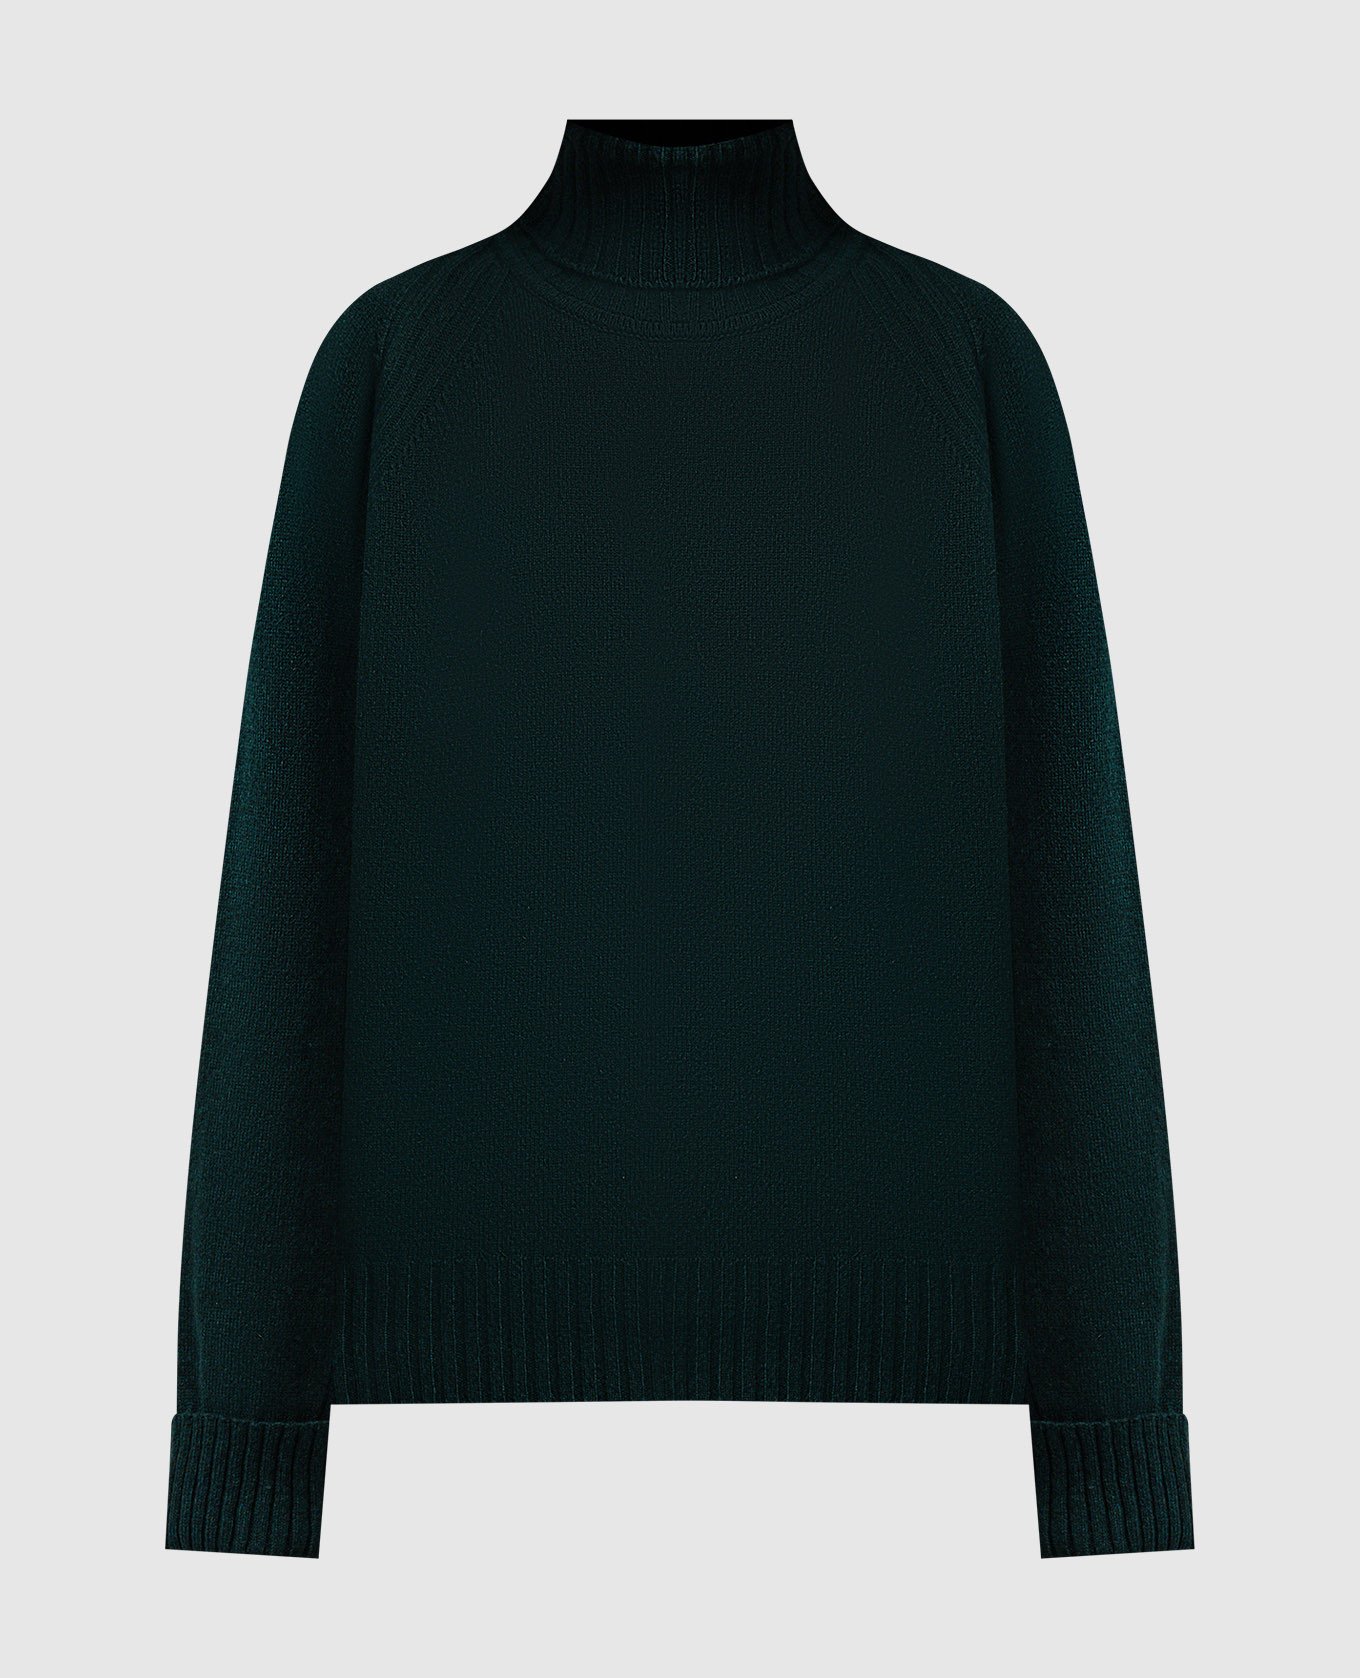 Fairlie green wool and cashmere sweater